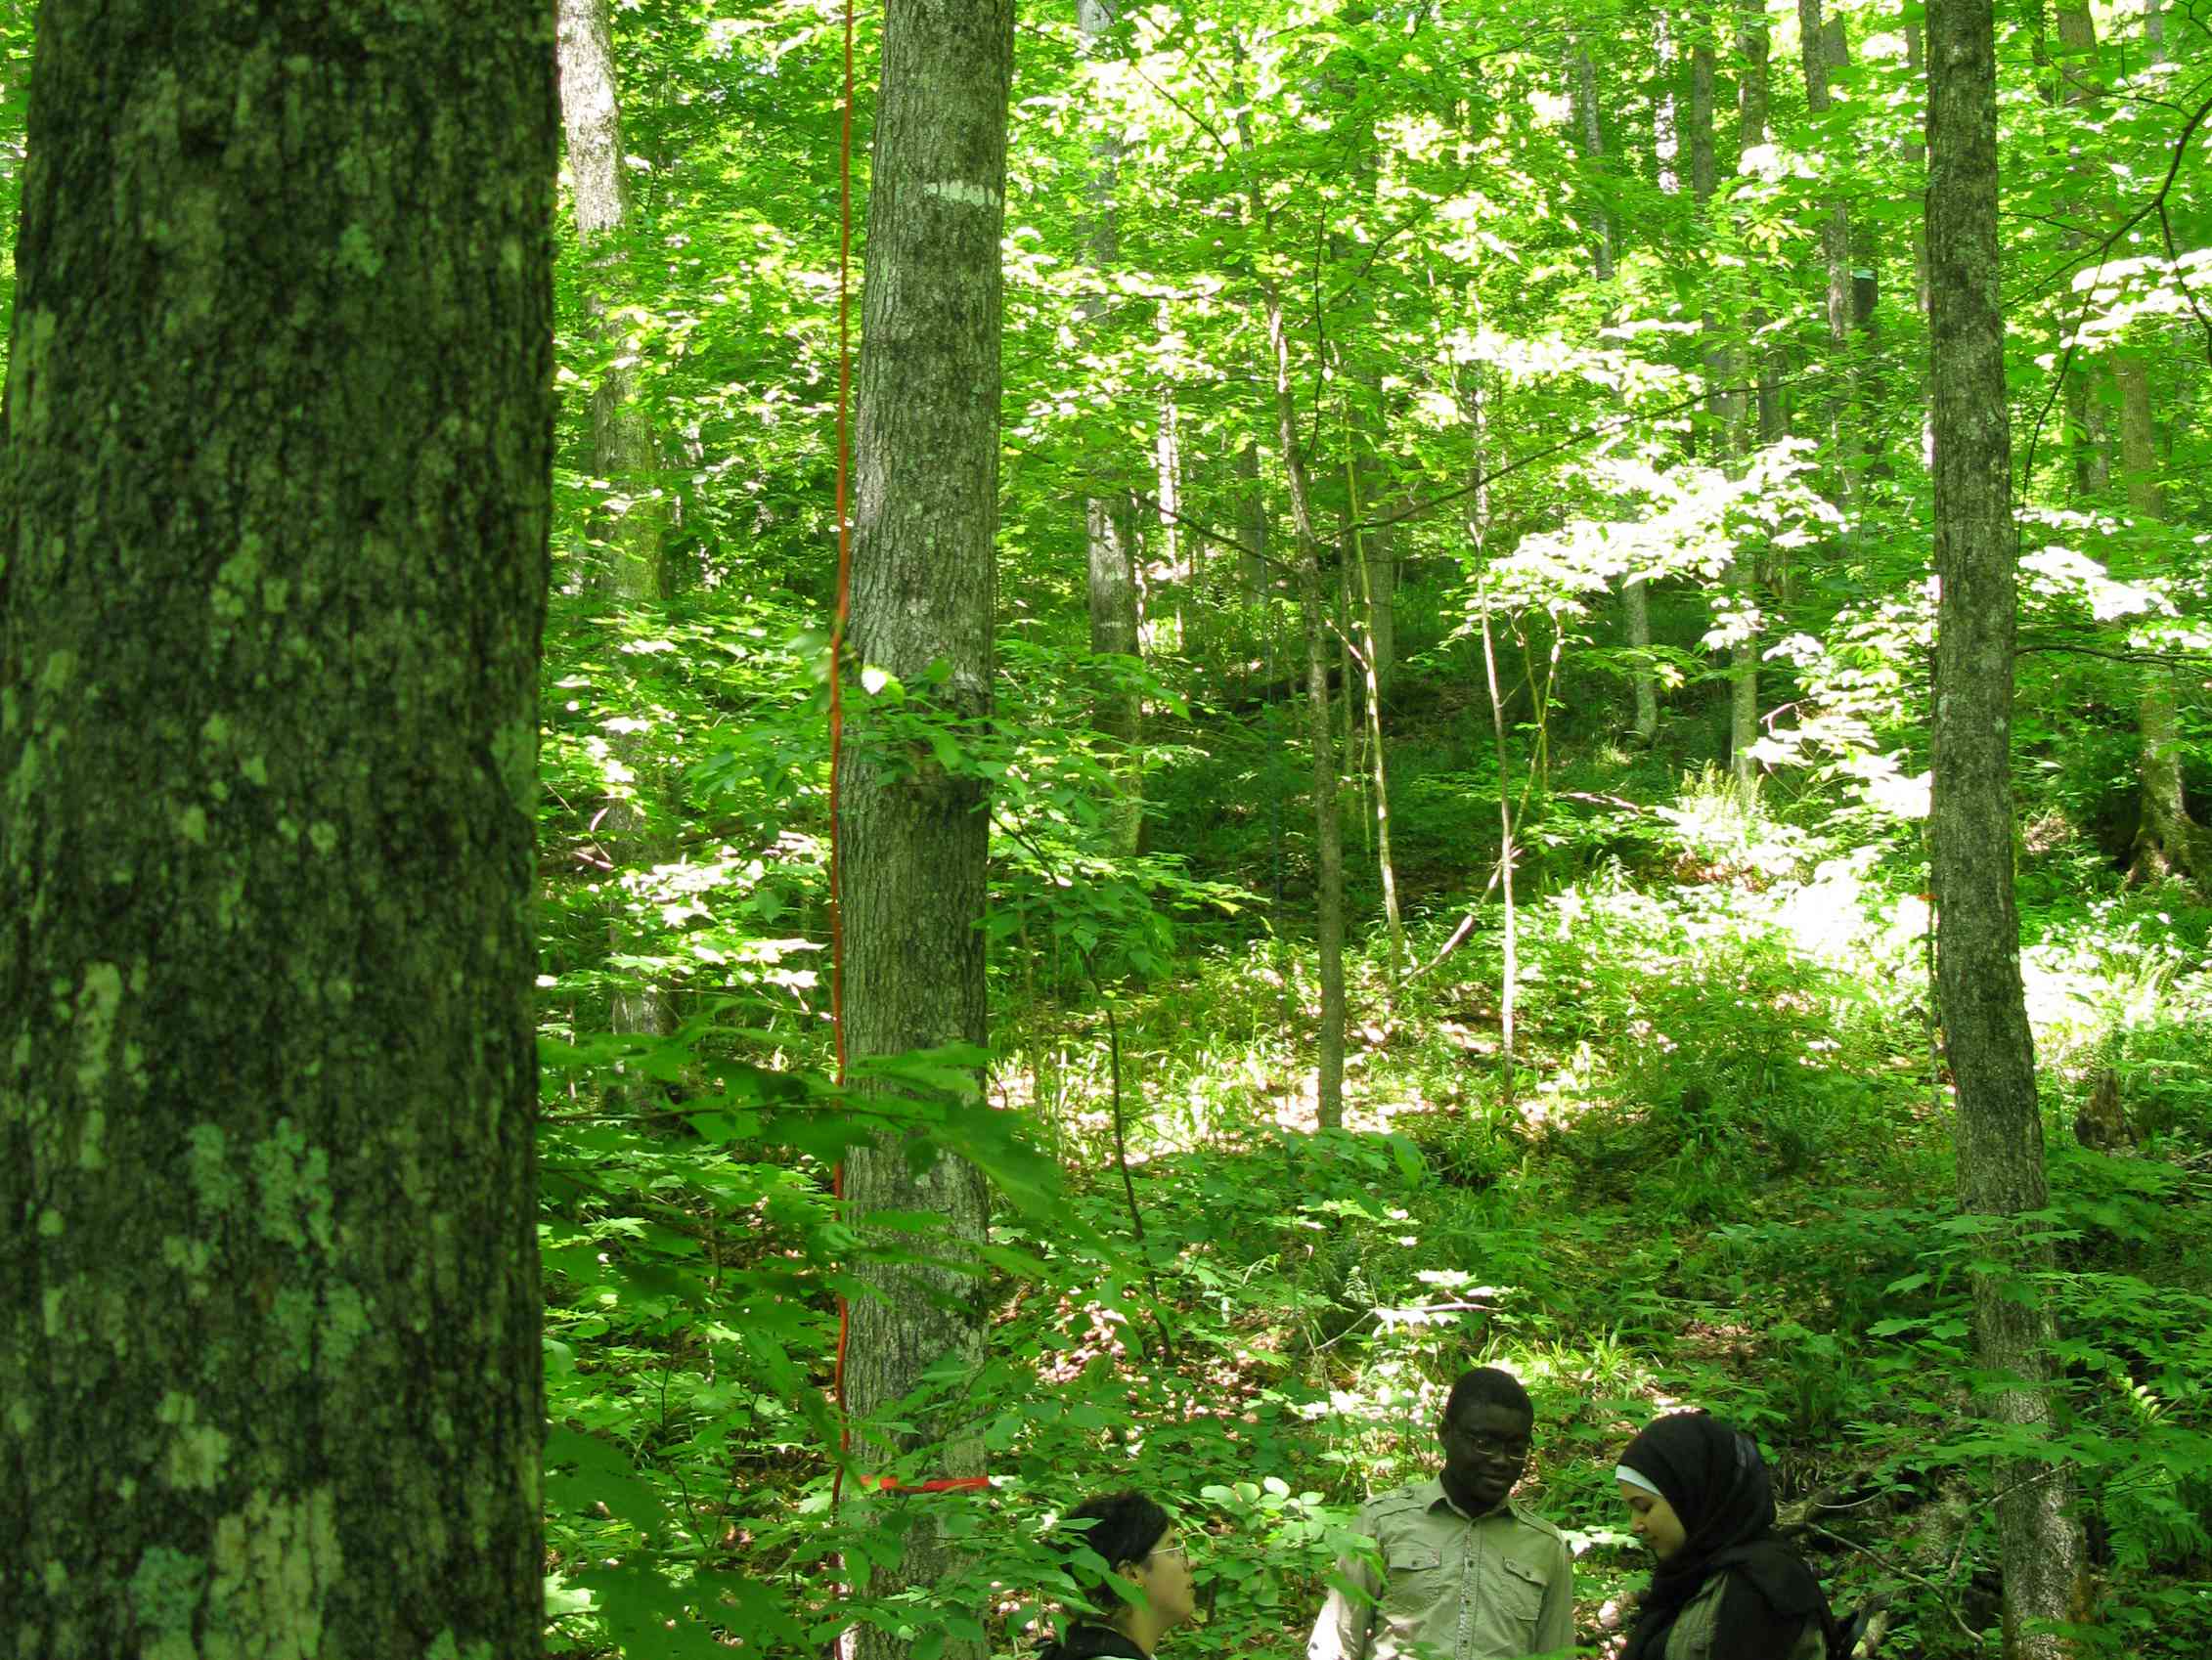 People standing in a forest.